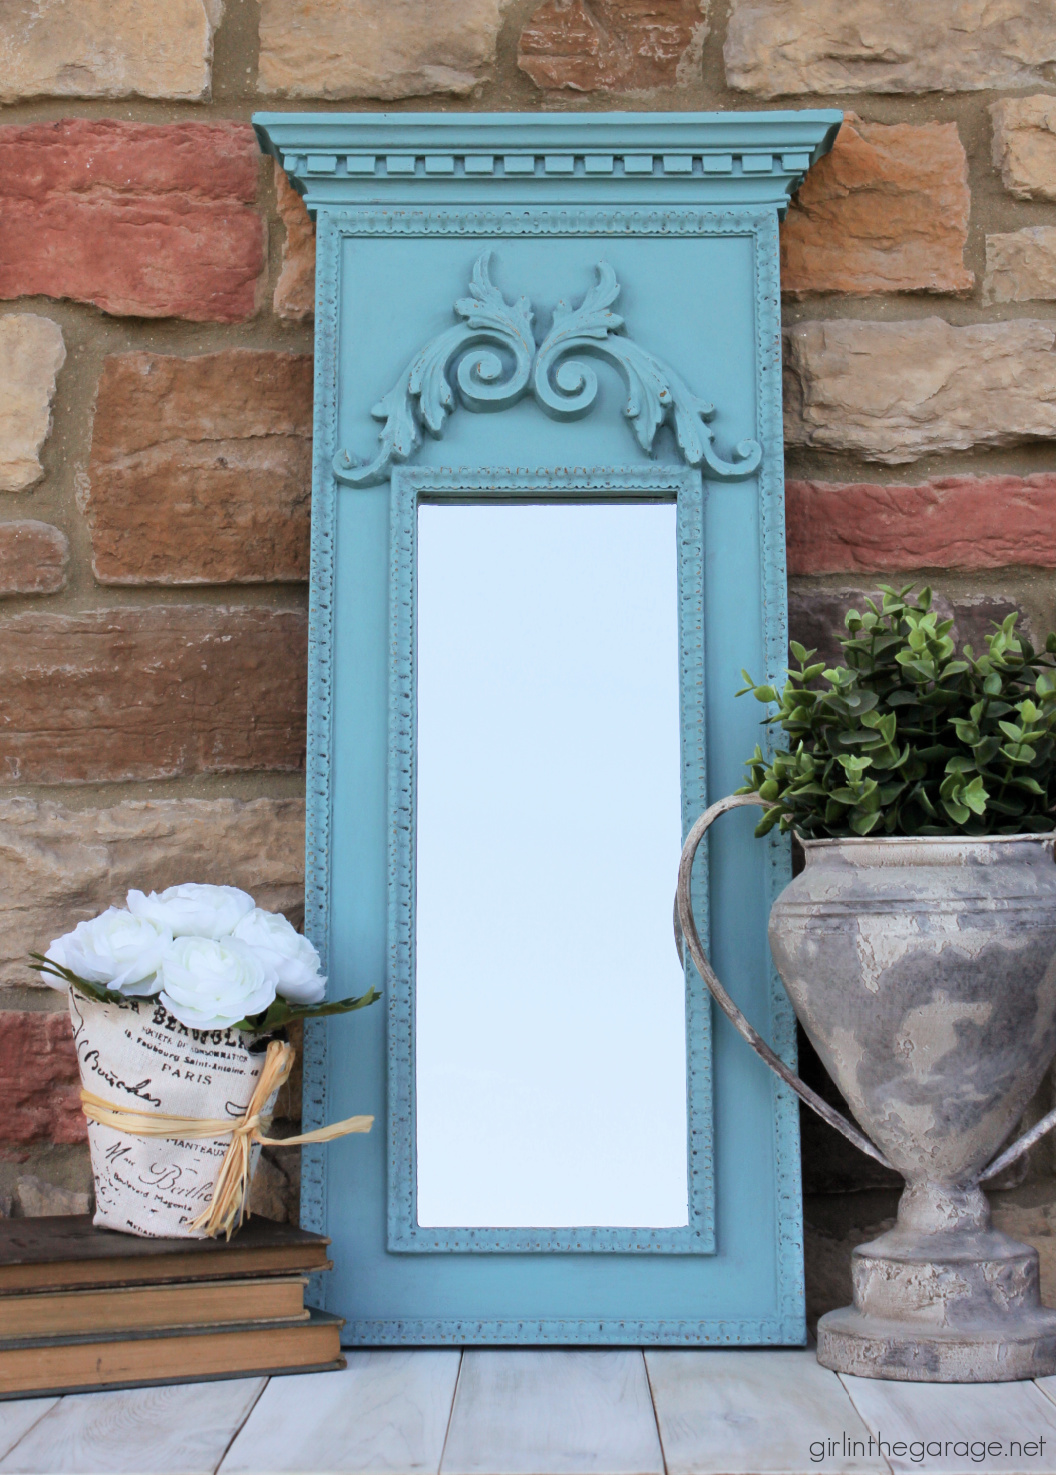 Discover creative ideas for updating thrifted decor in these tutorials for Chalk Painting a vintage mirror and stenciling a wall shelf. By Girl in the Garage